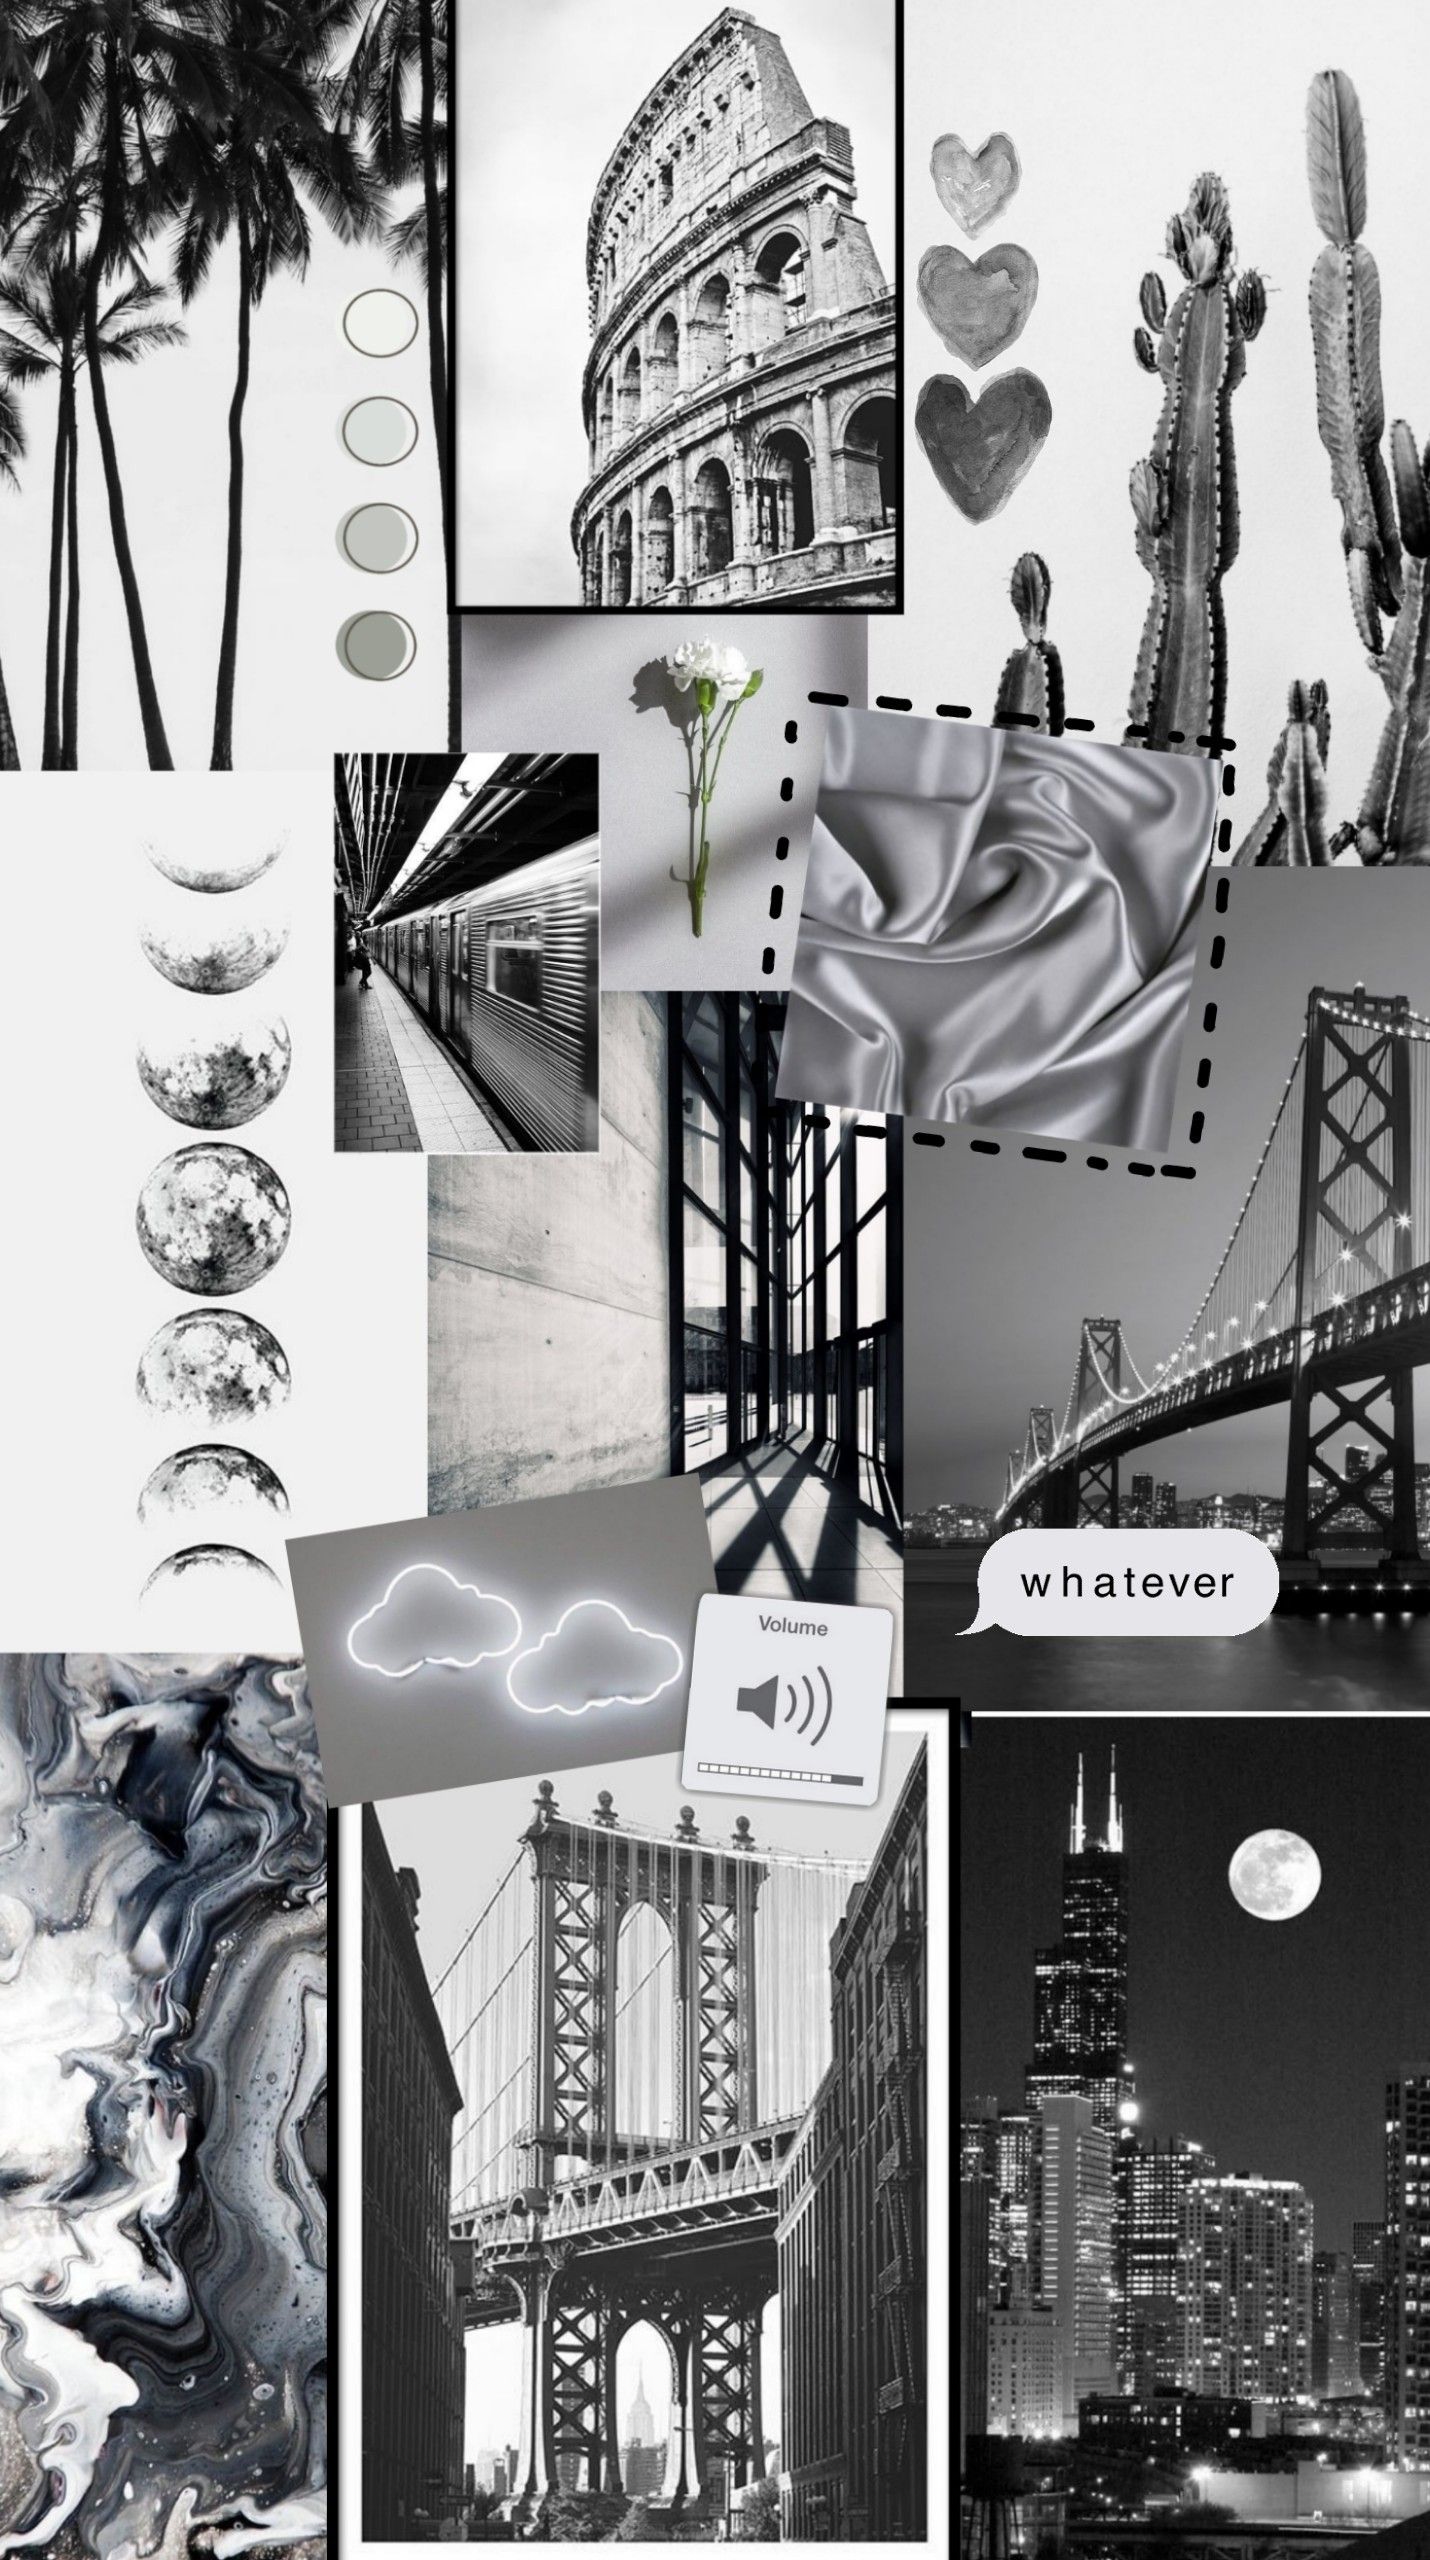 Cute Black And White Aesthetic Wallpapers